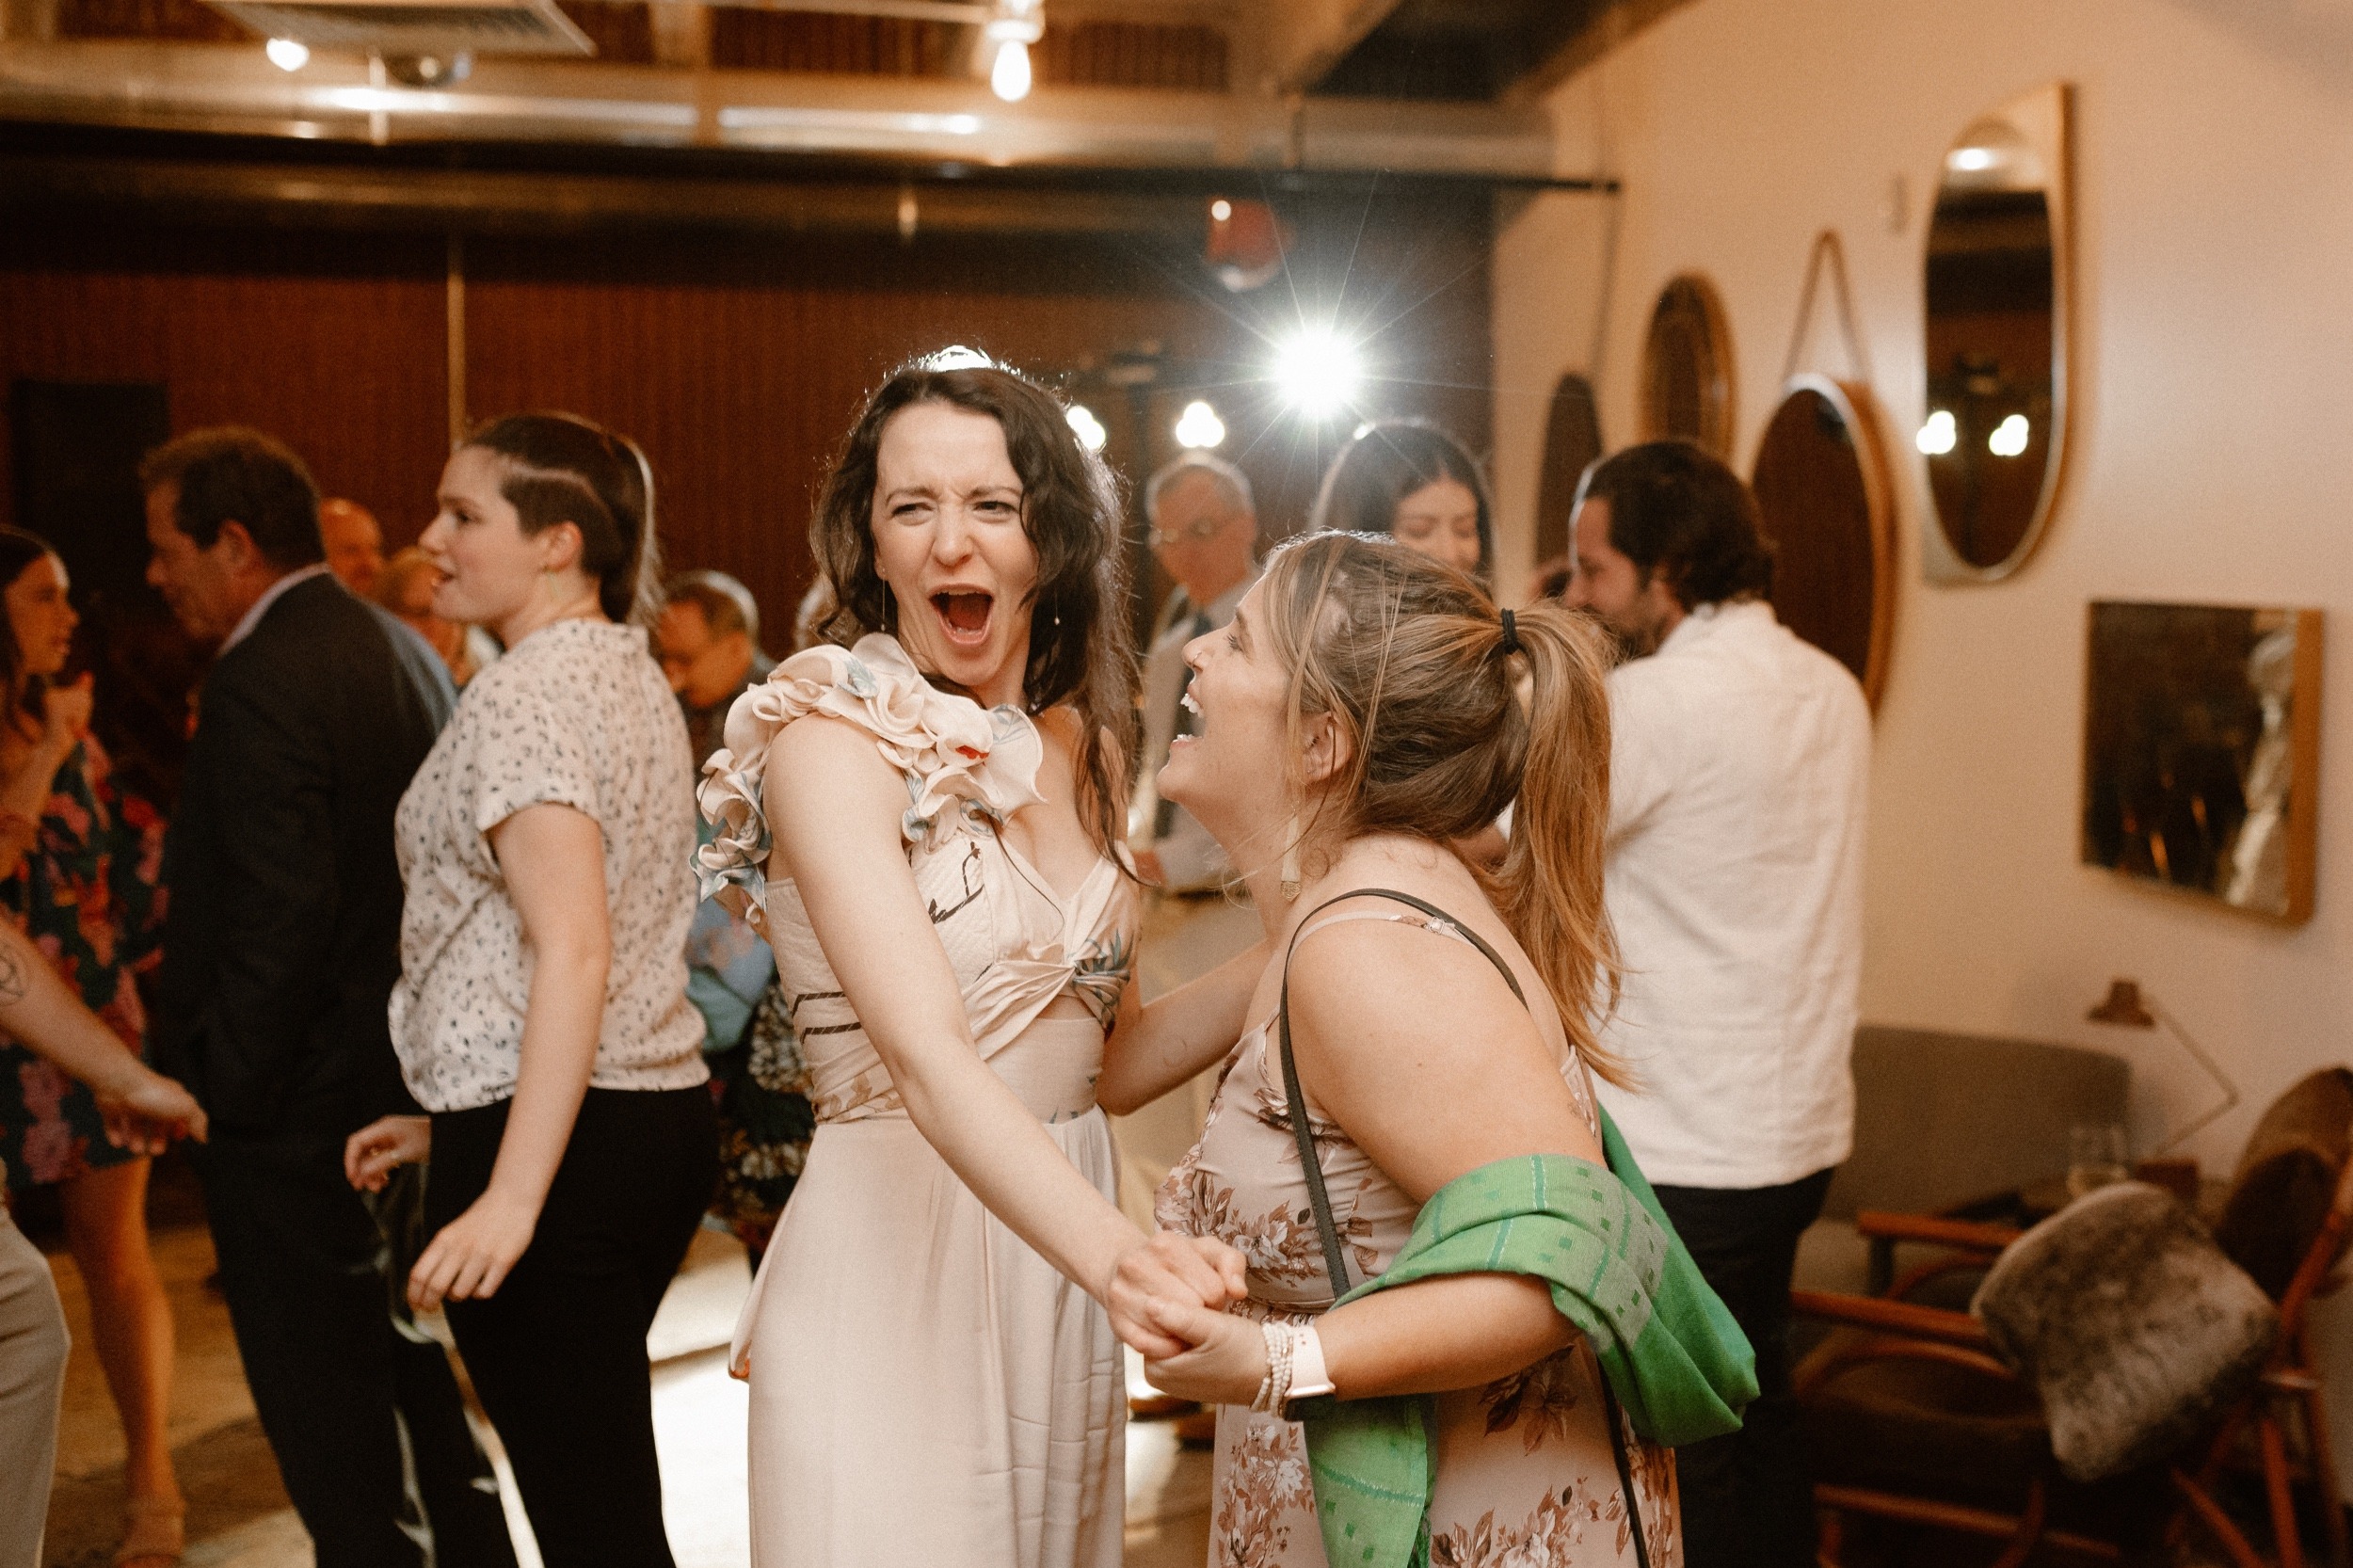 Wedding celebration at The Infinite Monkey Theorem in RiNo, Denver, Colorado. An intimate wedding celebration for Gwen and Alex, a year after their intimate elopement. Photos by Colorado wedding photographer, Ashley Joyce Photography.